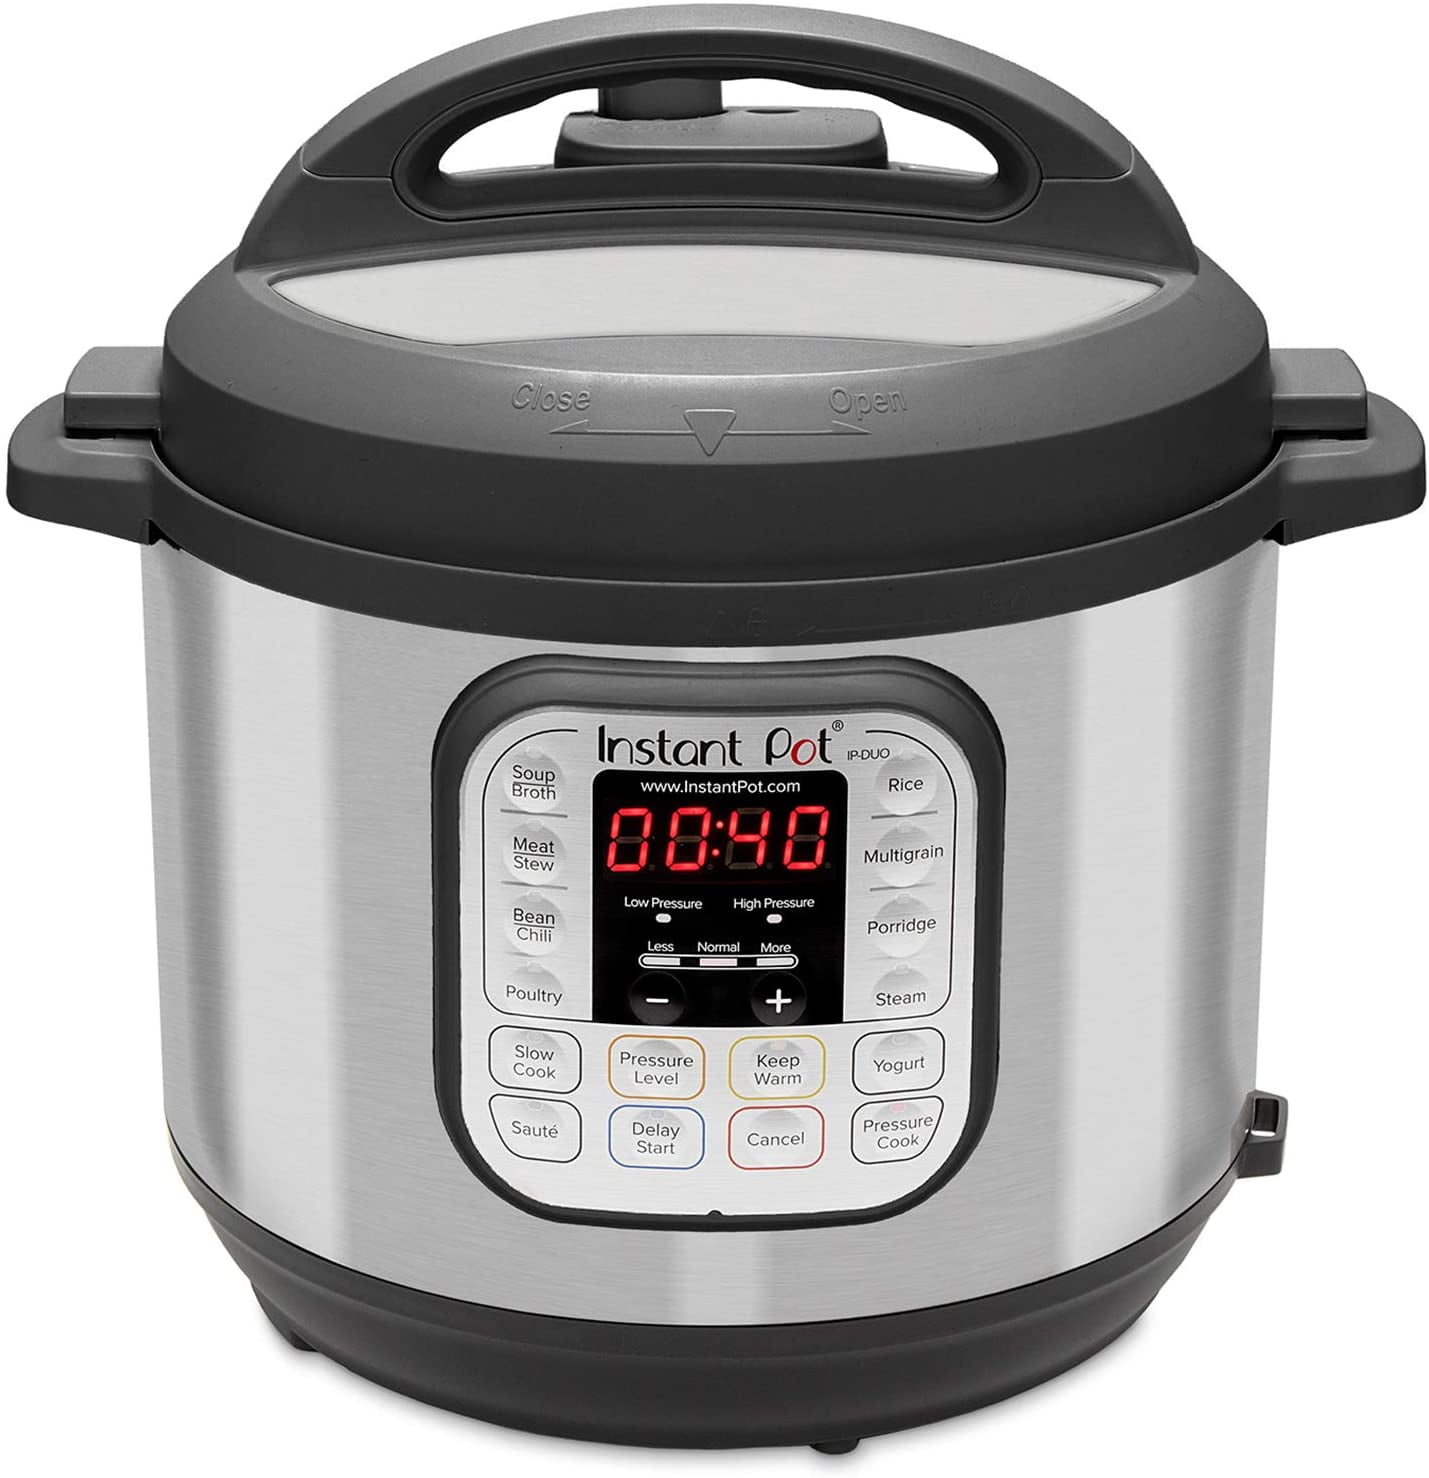 Instant Pot Duo 7-in-1 Electric Pressure Cooker, Slow Cooker, Rice Cooker,  Steamer, Sauté, Yogurt Maker, Warmer & Sterilizer, Includes Free App with  over 1900 Recipes, Stainless Steel, 8 Quart